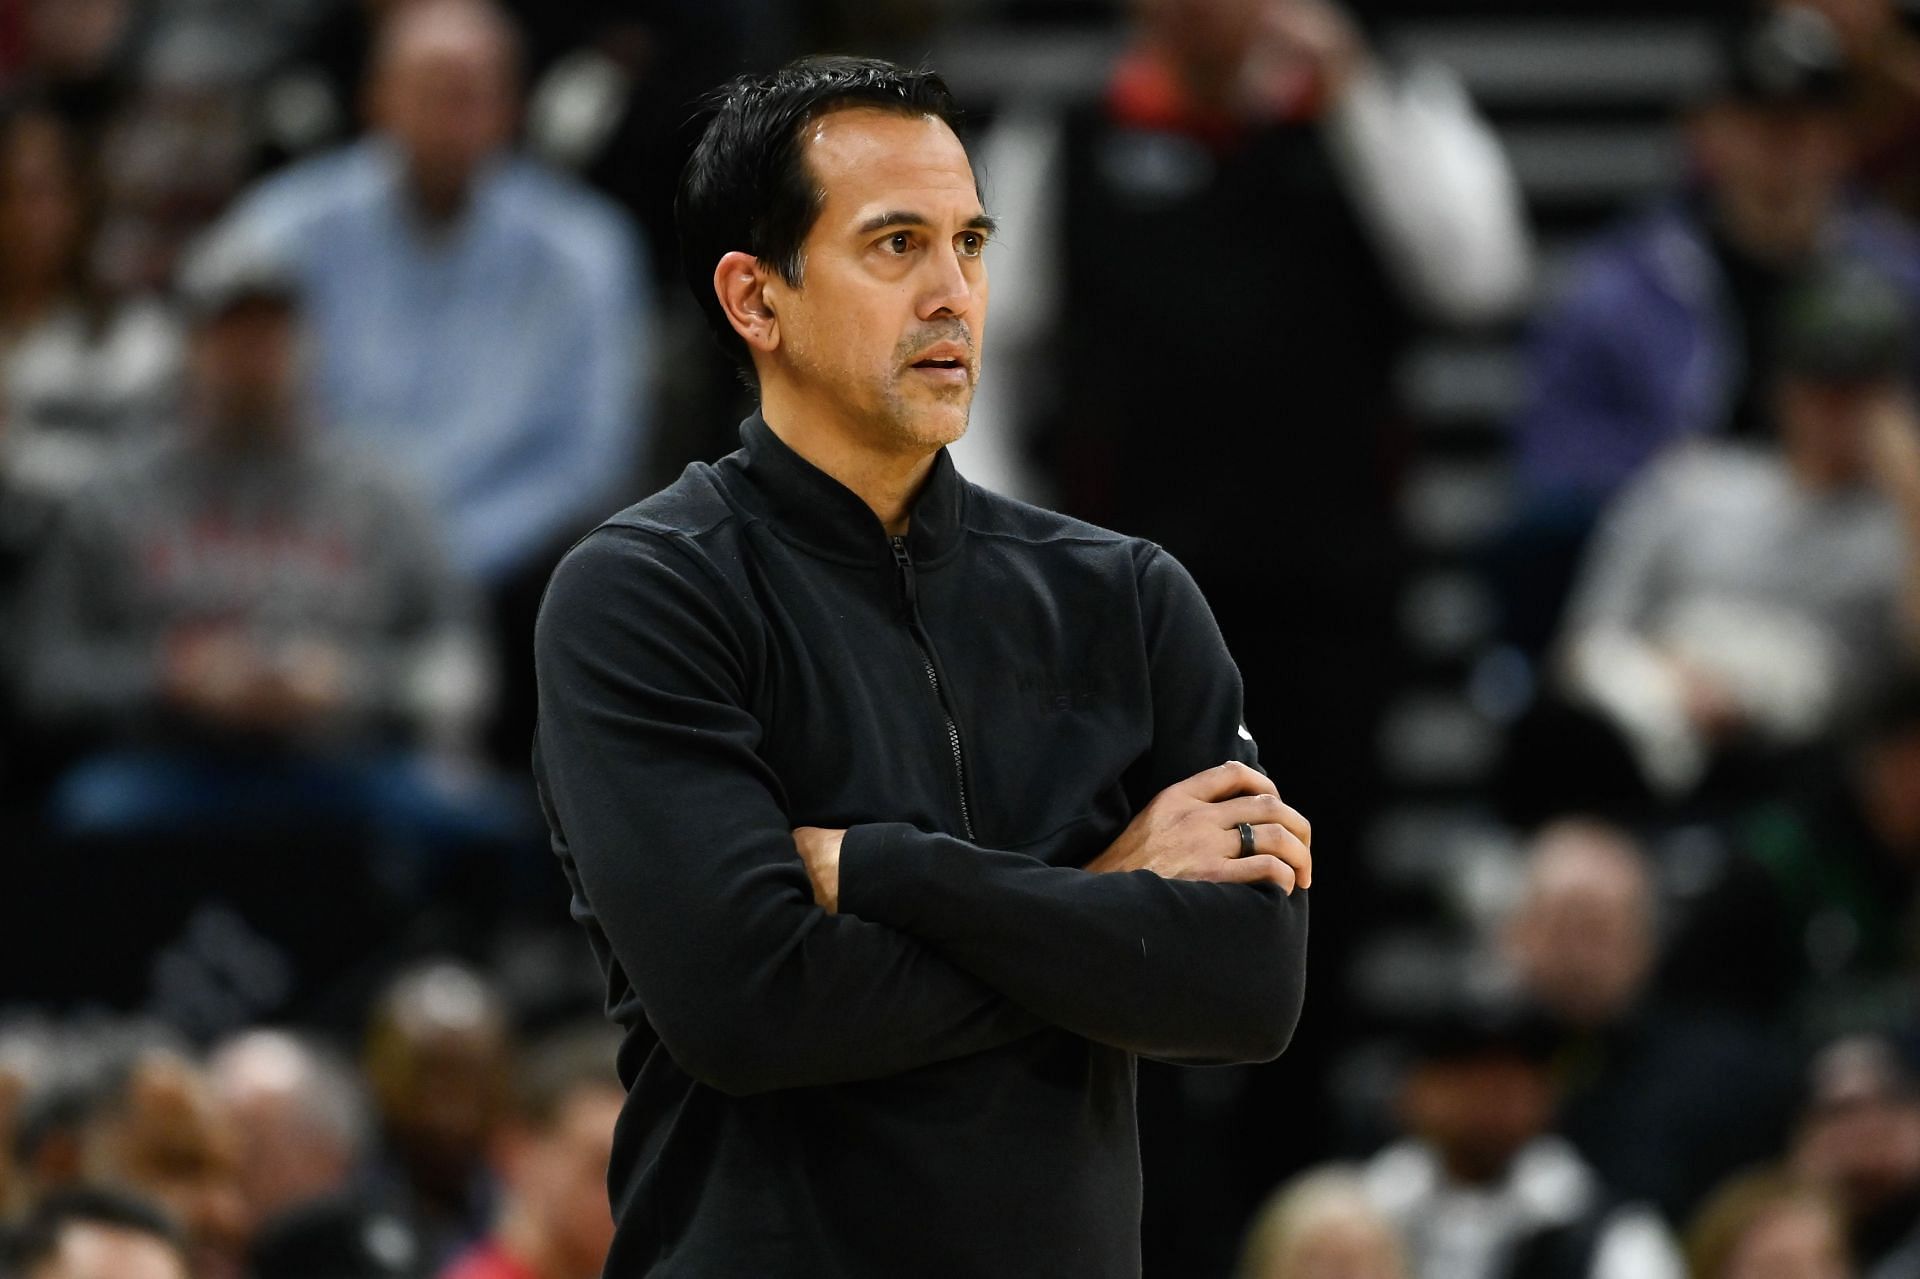 Erik Spoelstra of the Miami Heat agreed to a new multi-million contract.